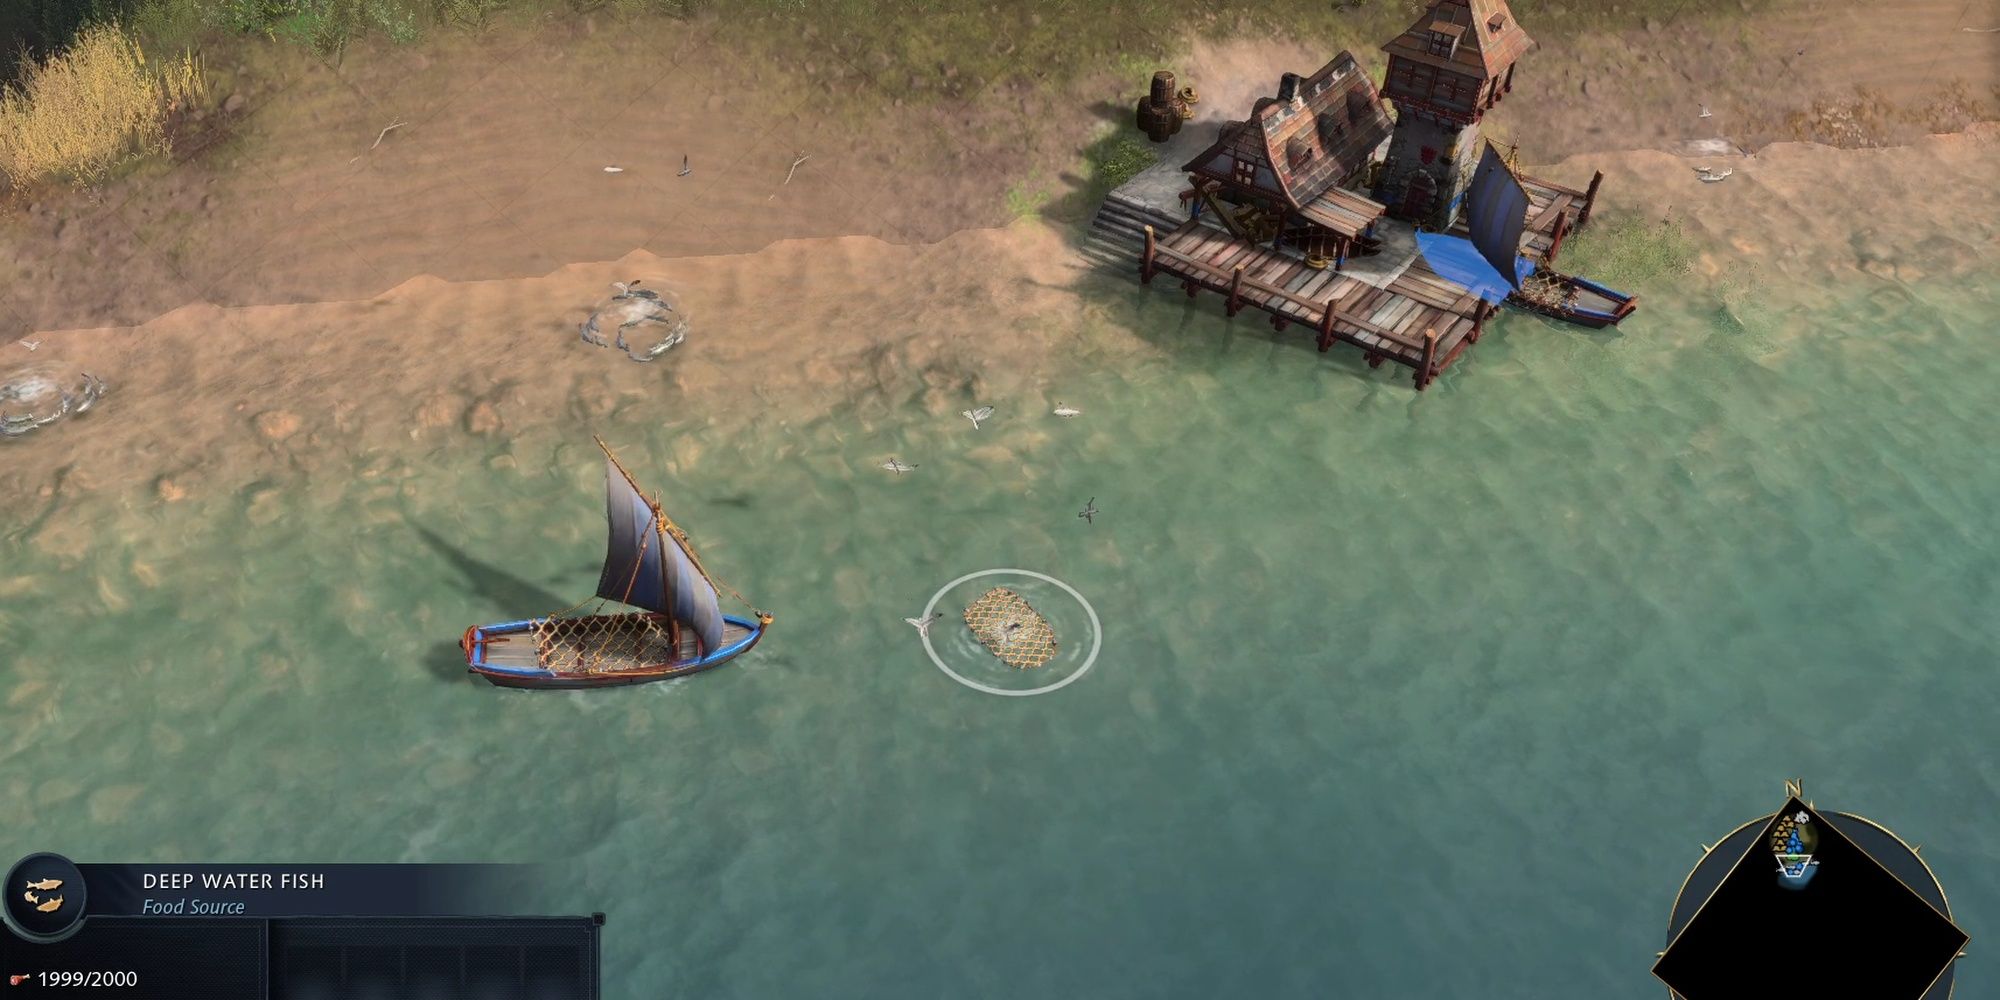 Age Of Empires IV: Fishing Boat Collecting From Deep Water Fish Node